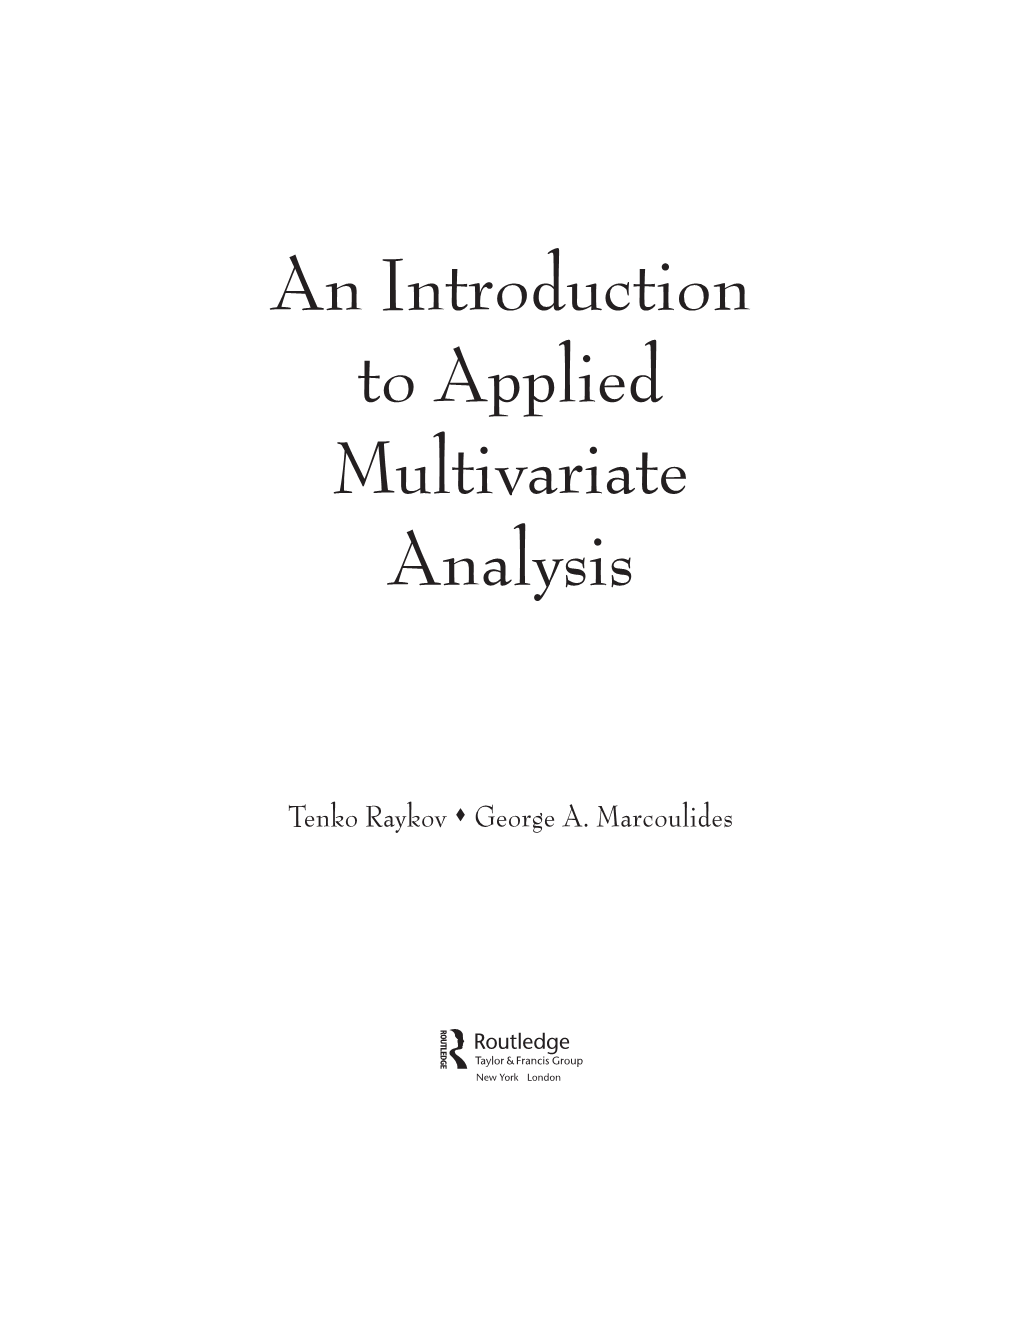 An Introduction to Applied Multivariate Analysis